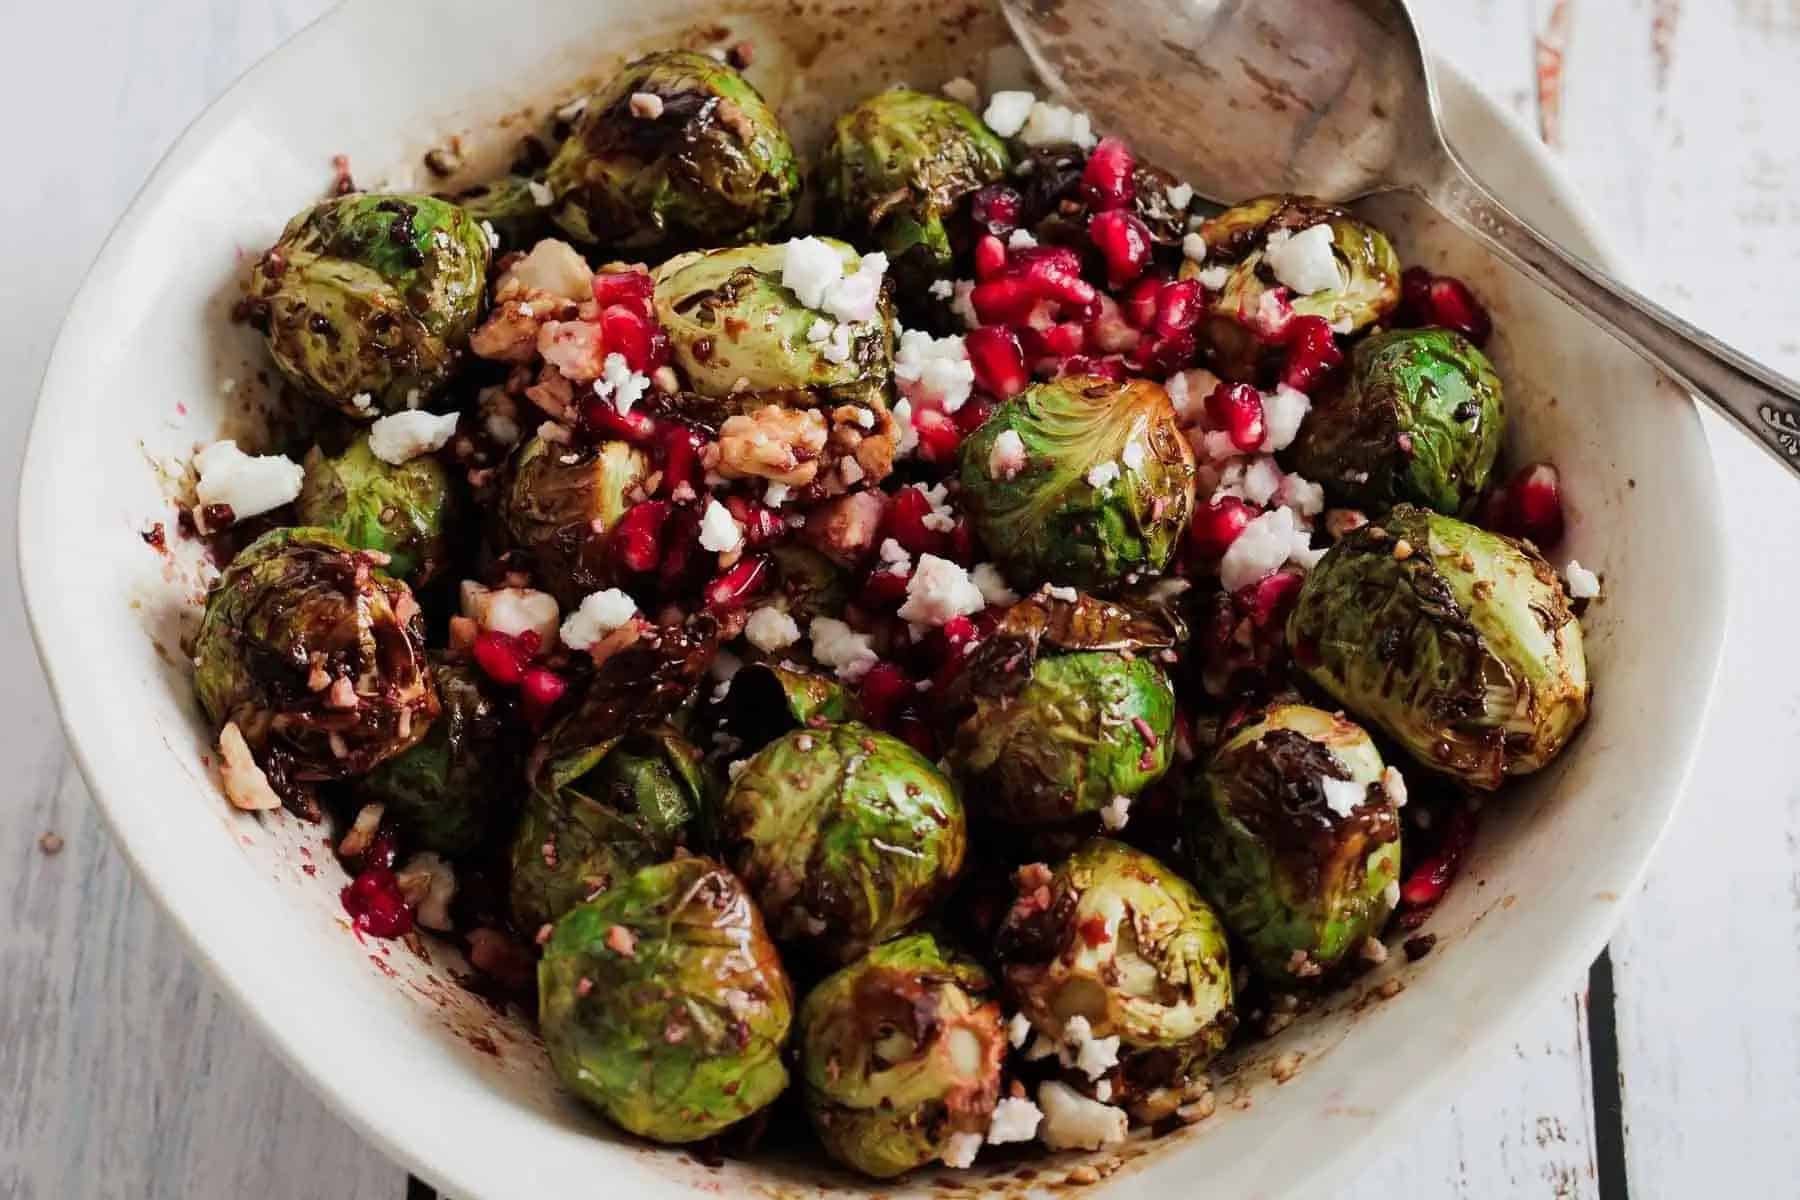 Roasted brussels sprouts with pomegranate and goat cheese.